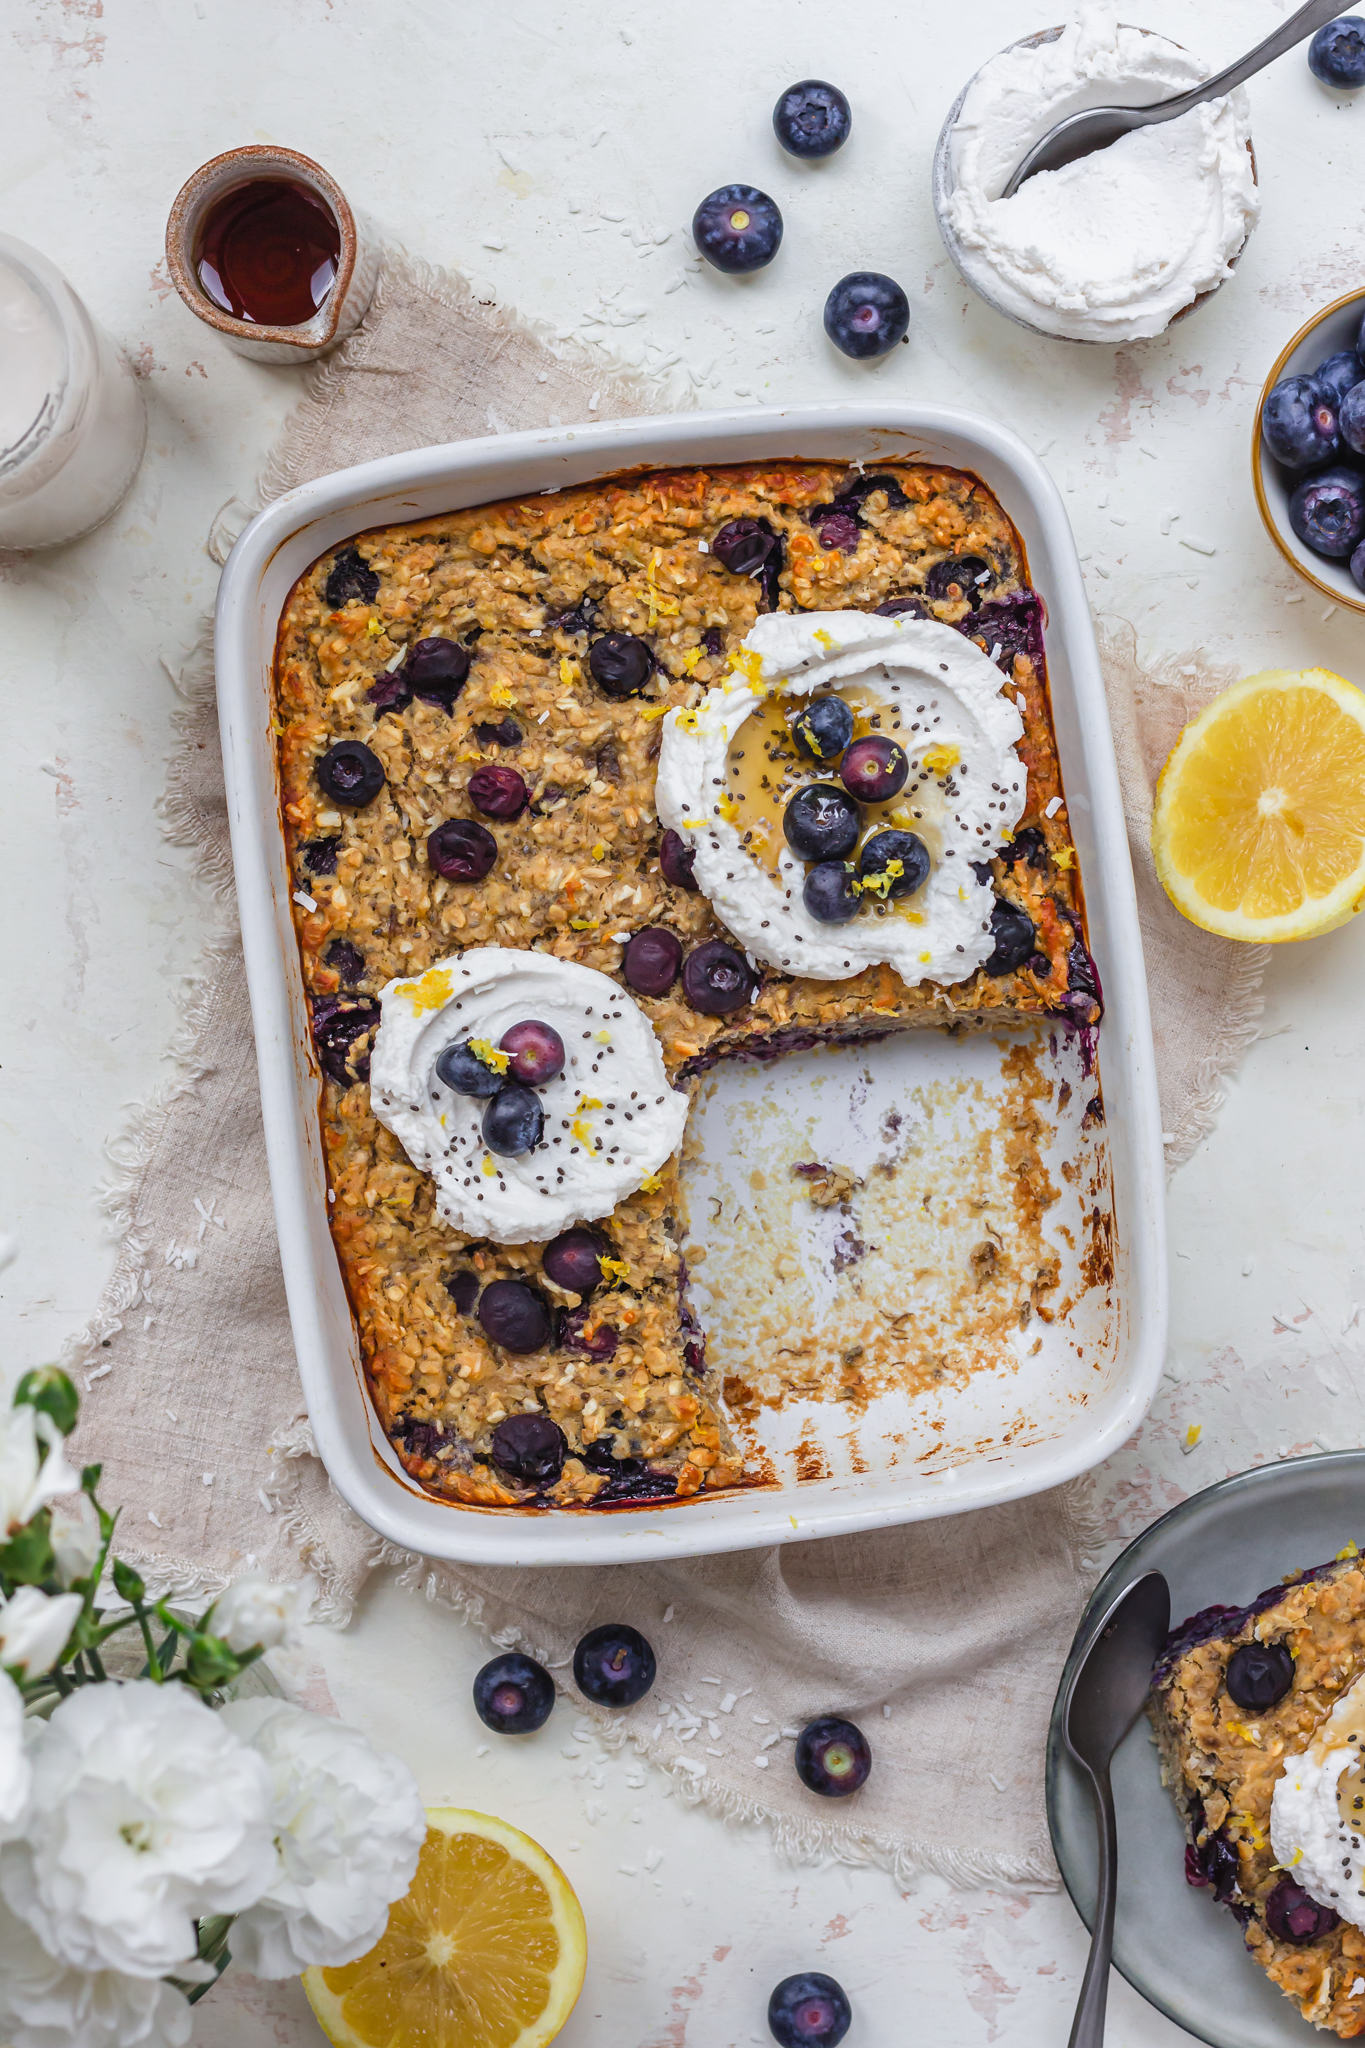 A dish of Lemon and Blueberry Chia Baked Oats